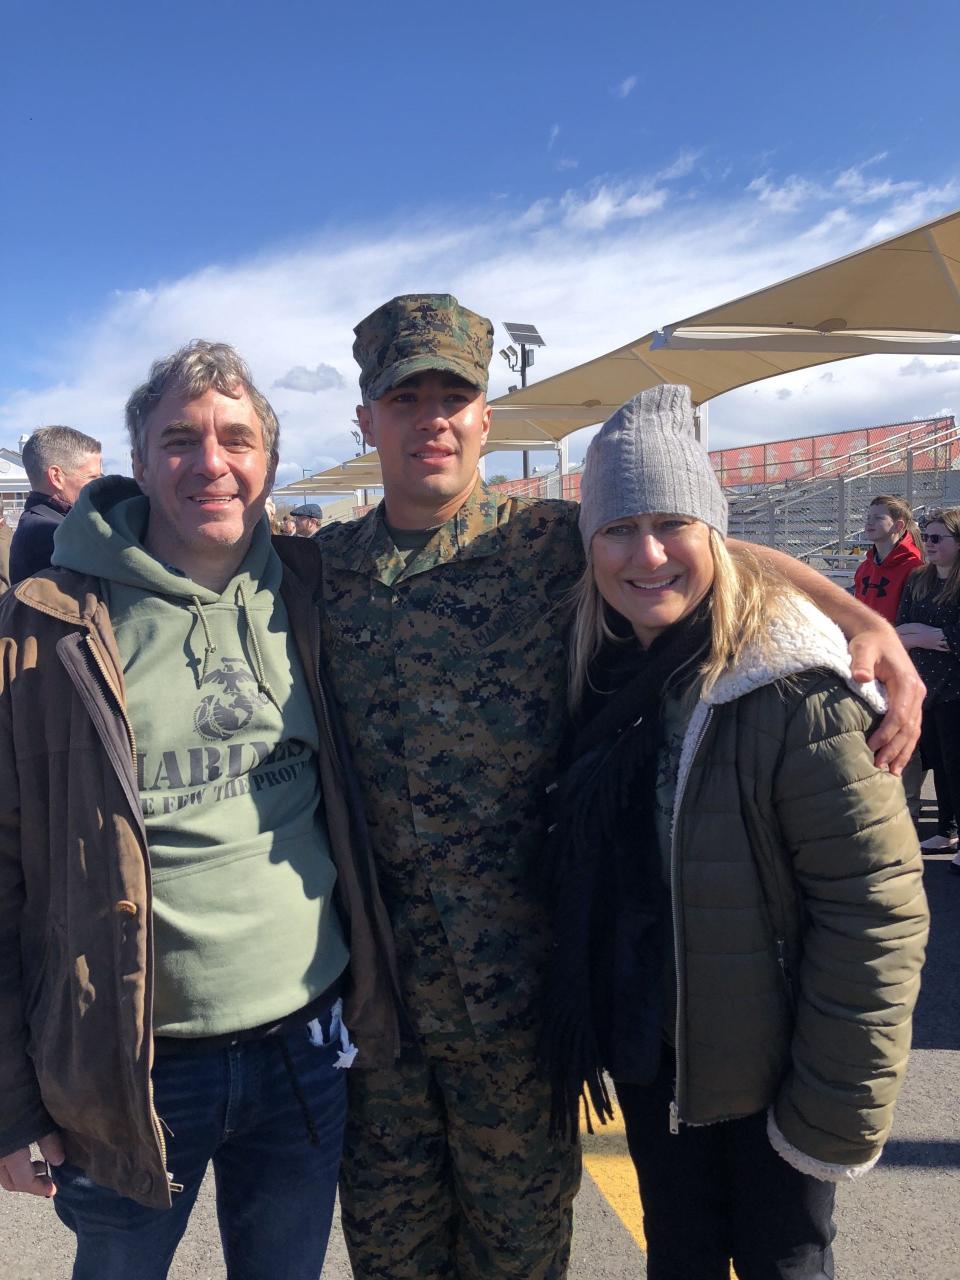 U.S. Marine 2nd Lt. Matthew Weiss of Tenafly, New Jersey, with parents, Peter and Louise, after graduating from Marine Officers' Candidate School in Quantico, Virginia. After receiving his BA and MBA from University of Pennsylvania and then working for a defense contractor, Weiss joined the Marines. He has now written a book on how the Pentagon can improve recruiting with Generation Z.